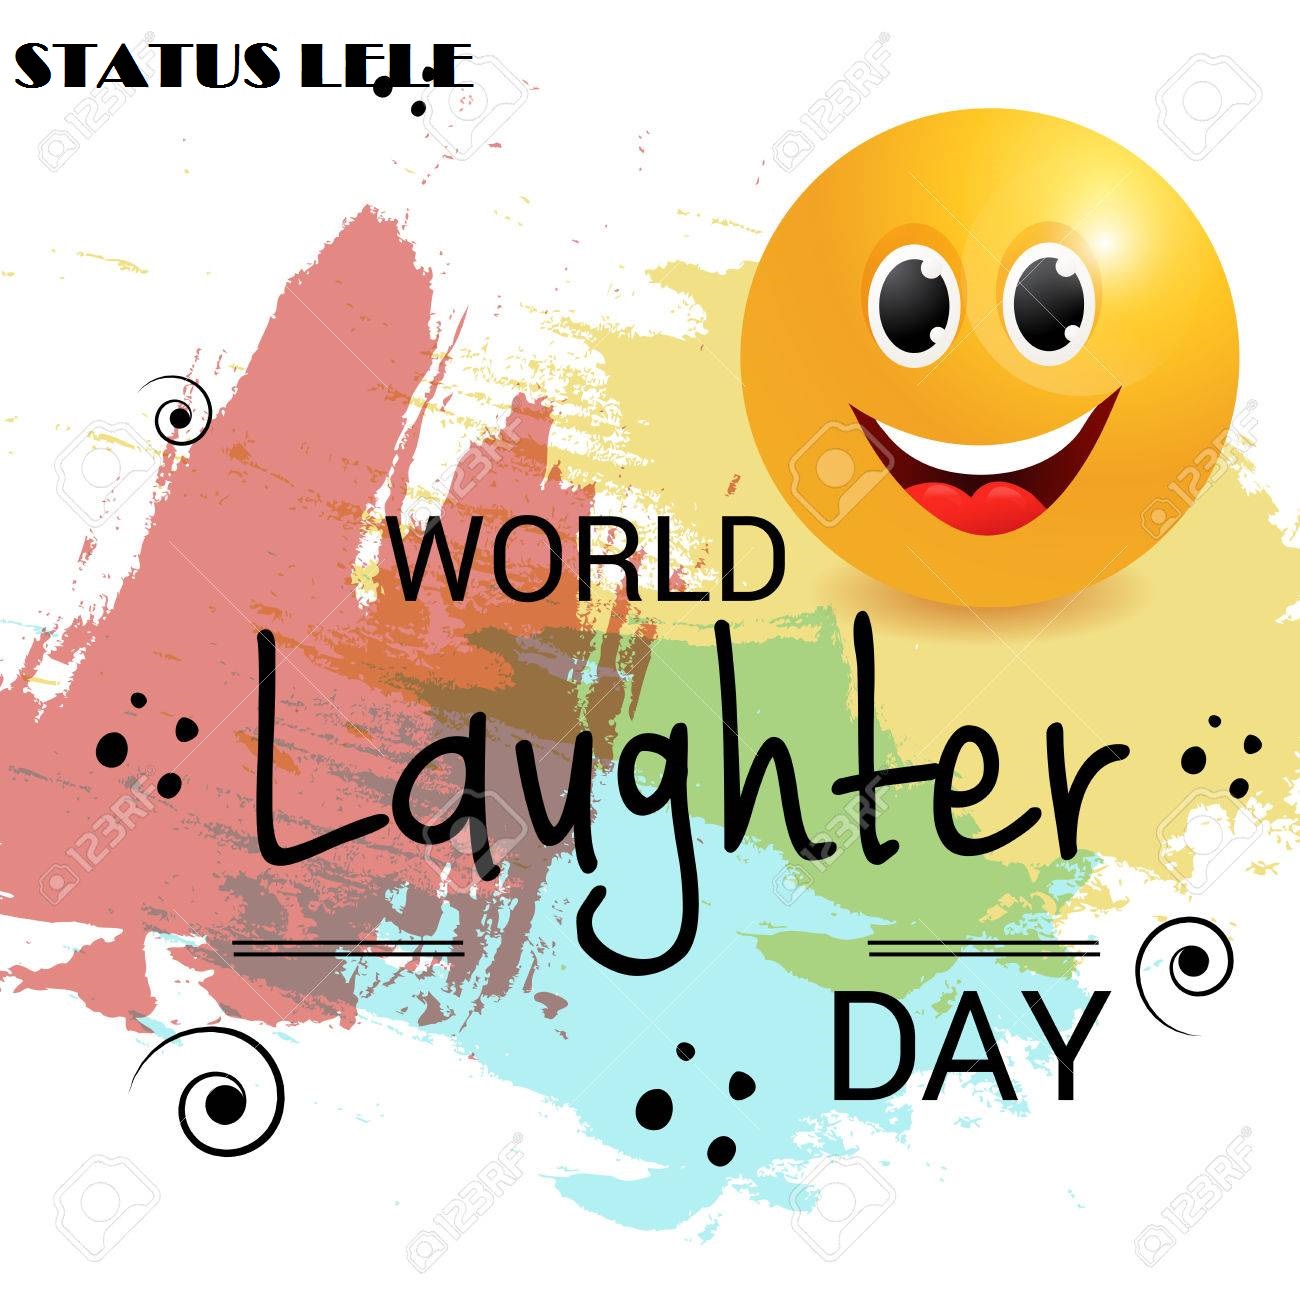 World Laughter Day Quotes, HD Wallpaper, Images, Photos Status Lelee